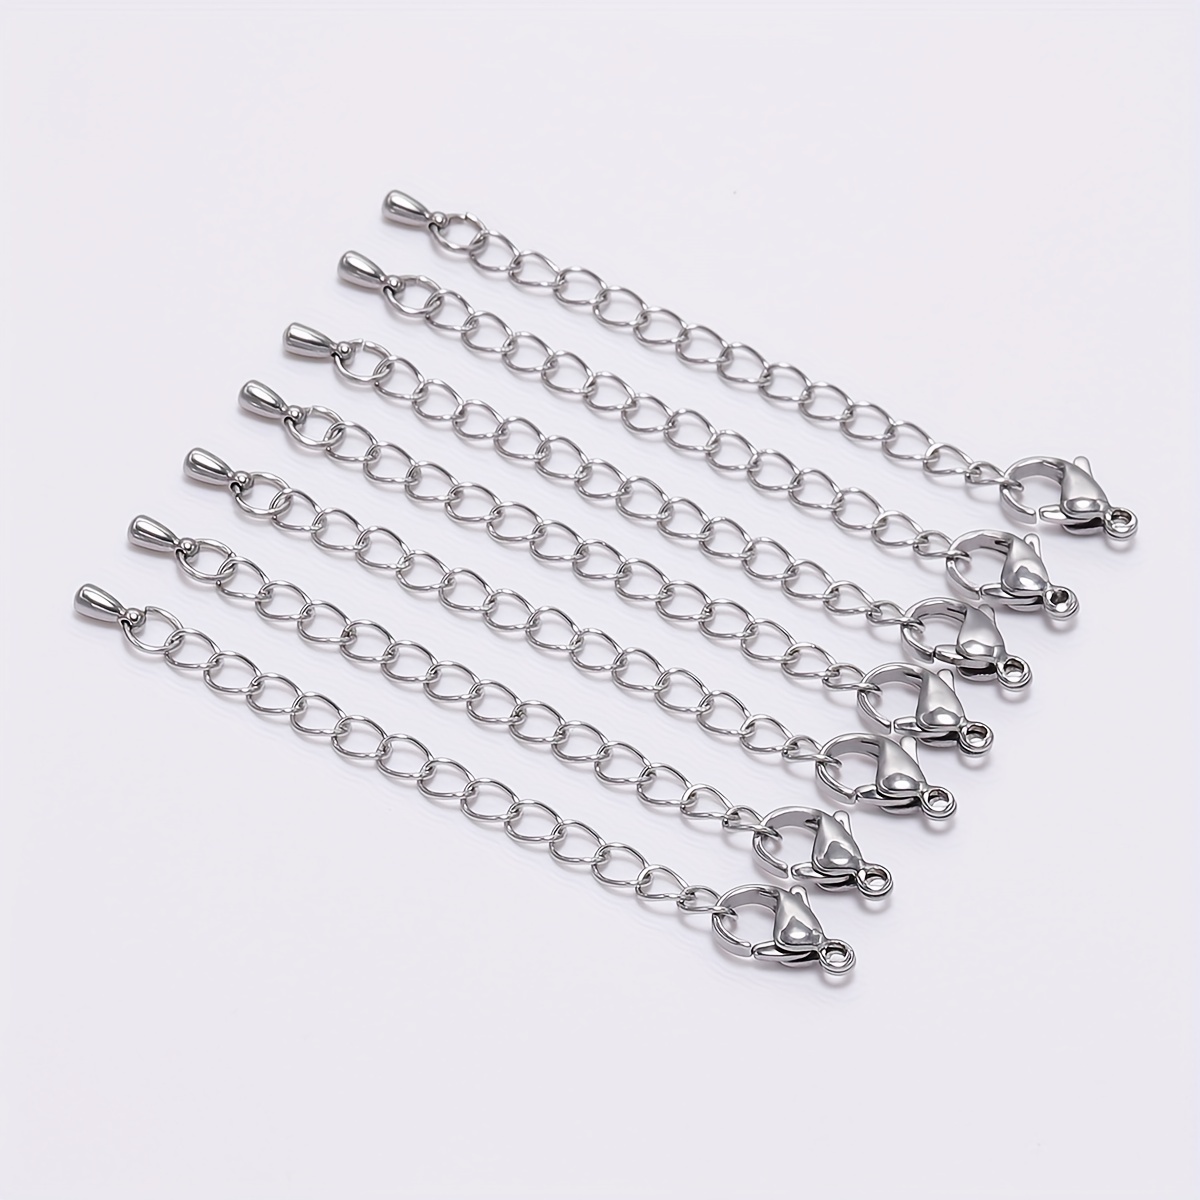 3-pack Left Hand Necklace Clasp Converter, 925 Sterling Silver